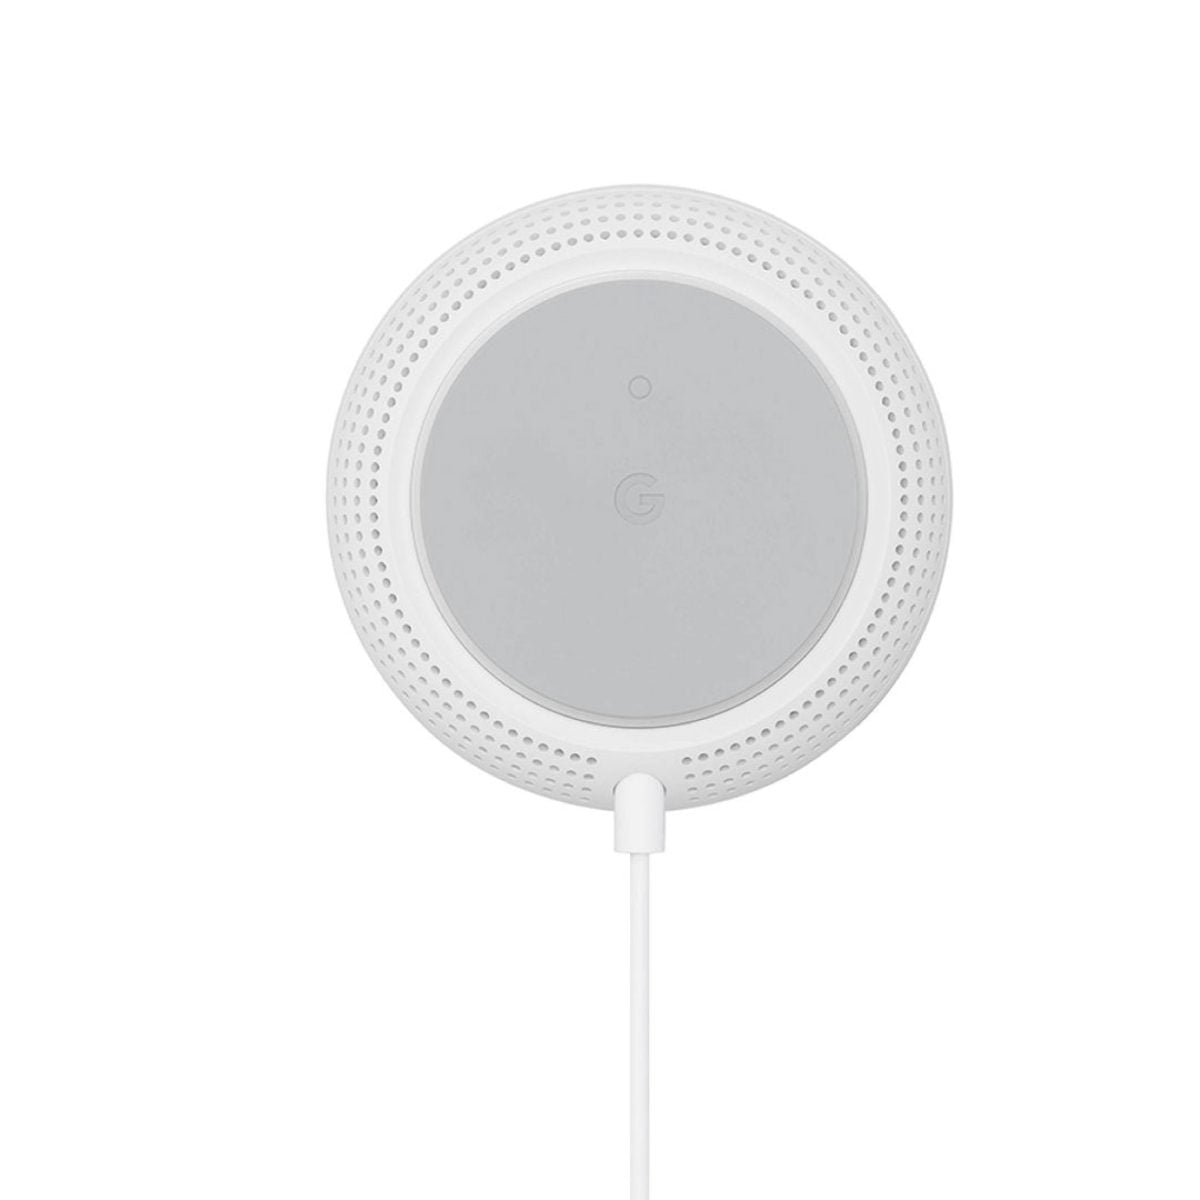 Dsd2212 07 Scaled Google Https://Youtu.be/Wsduj9Sm78K Google Google Nest Wifi Router And 2 Access Points (2020)